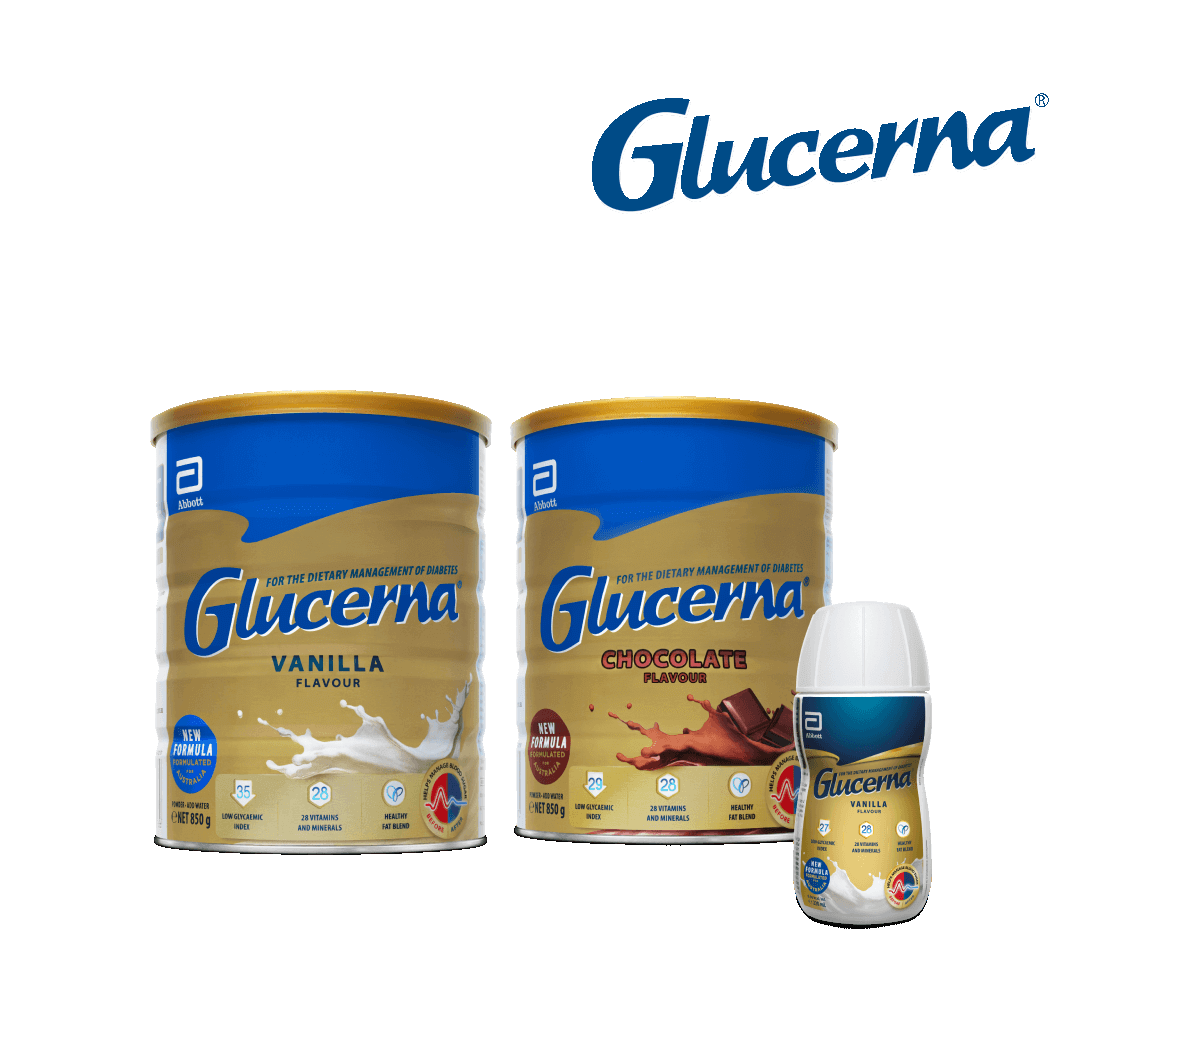 Glucerna® - World's number one selling diabetes-specific nutritional supplement.